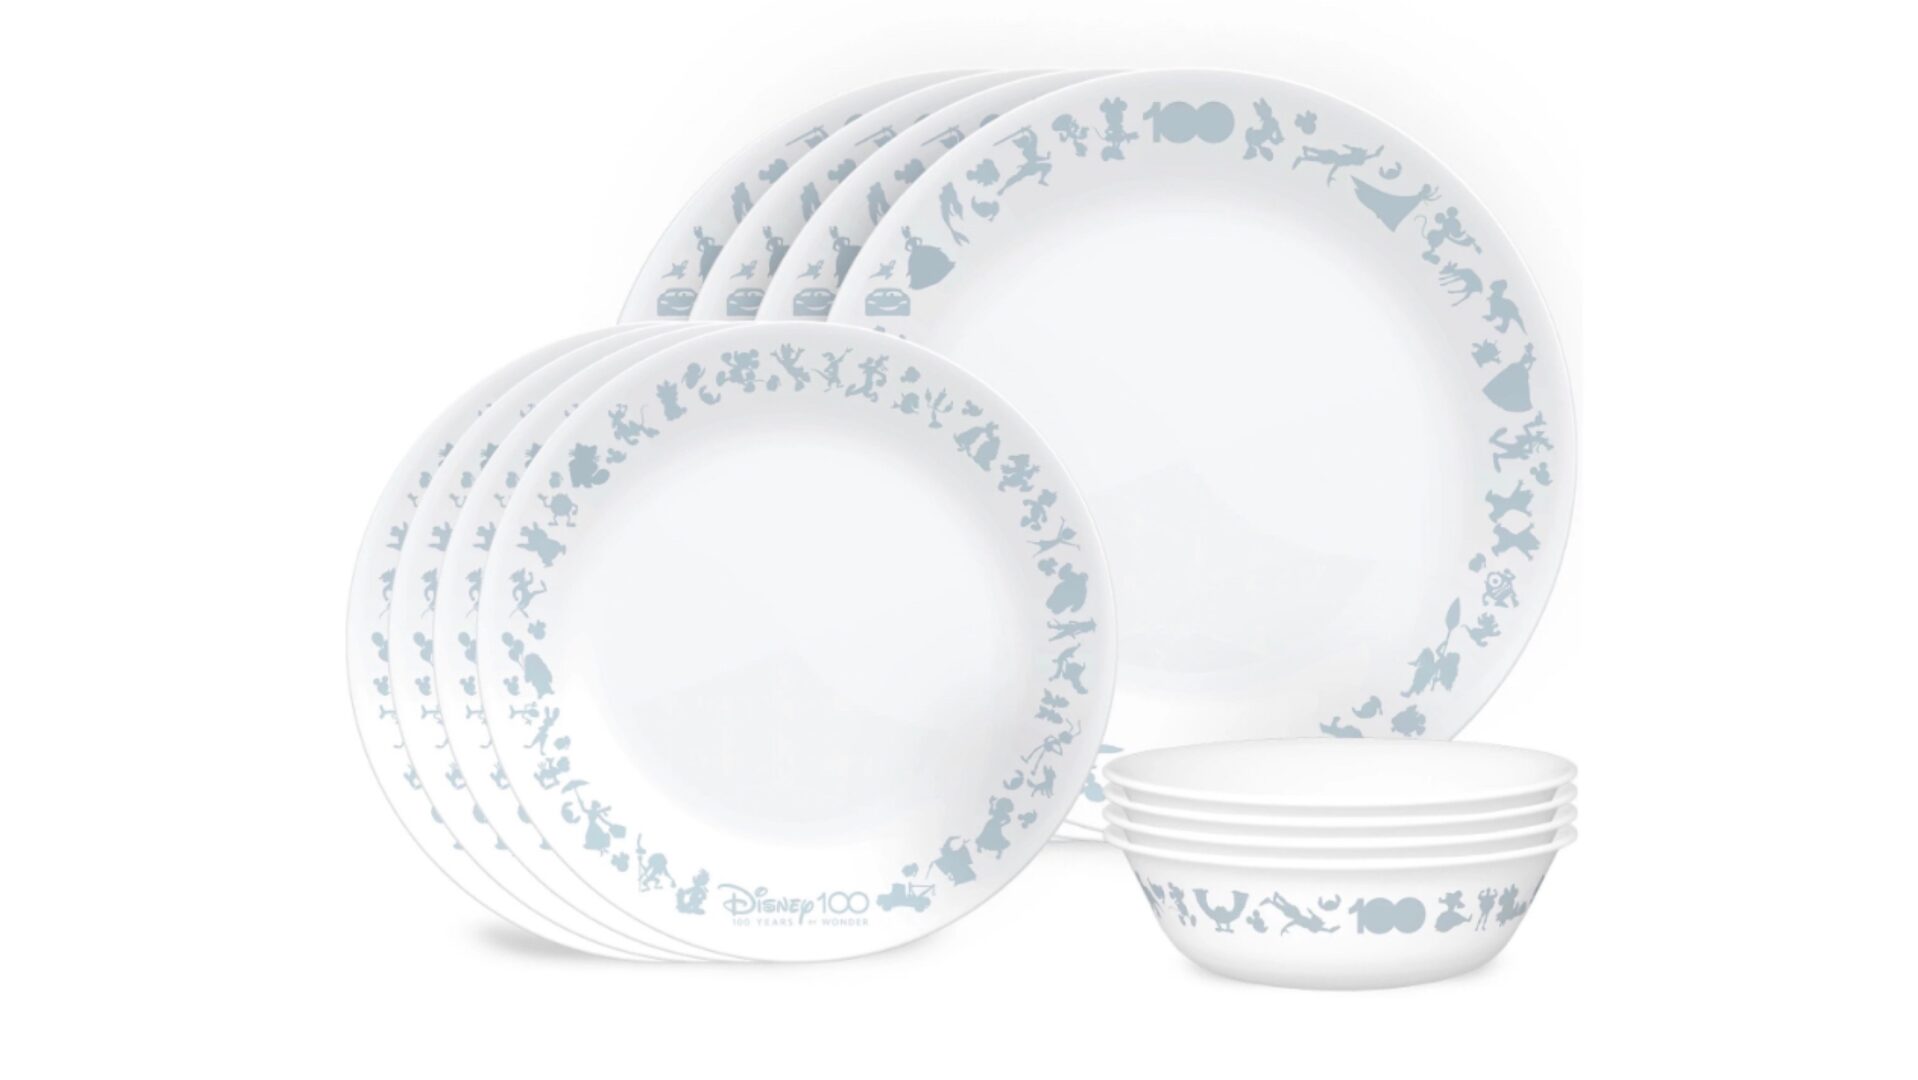 New Disney100 12 Pieces Dinnerware Set by Corelle To Have Magical Meals Everyday!